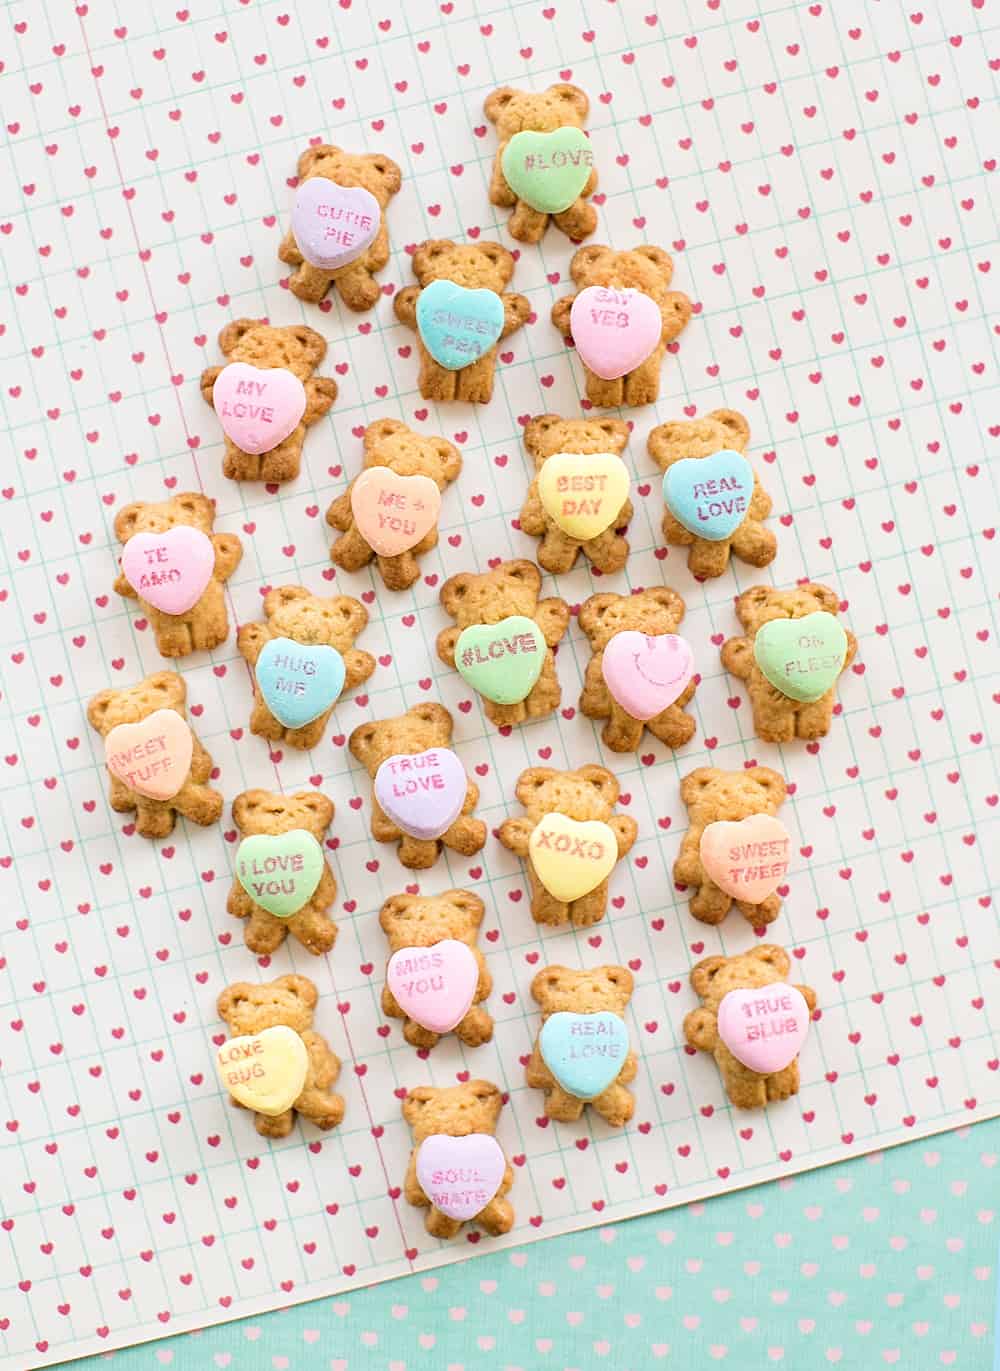 These Adorable Bear Holding Heart Cookies make a an cute and easy Valentine treat for kids or school lunch snack they can make themselves.